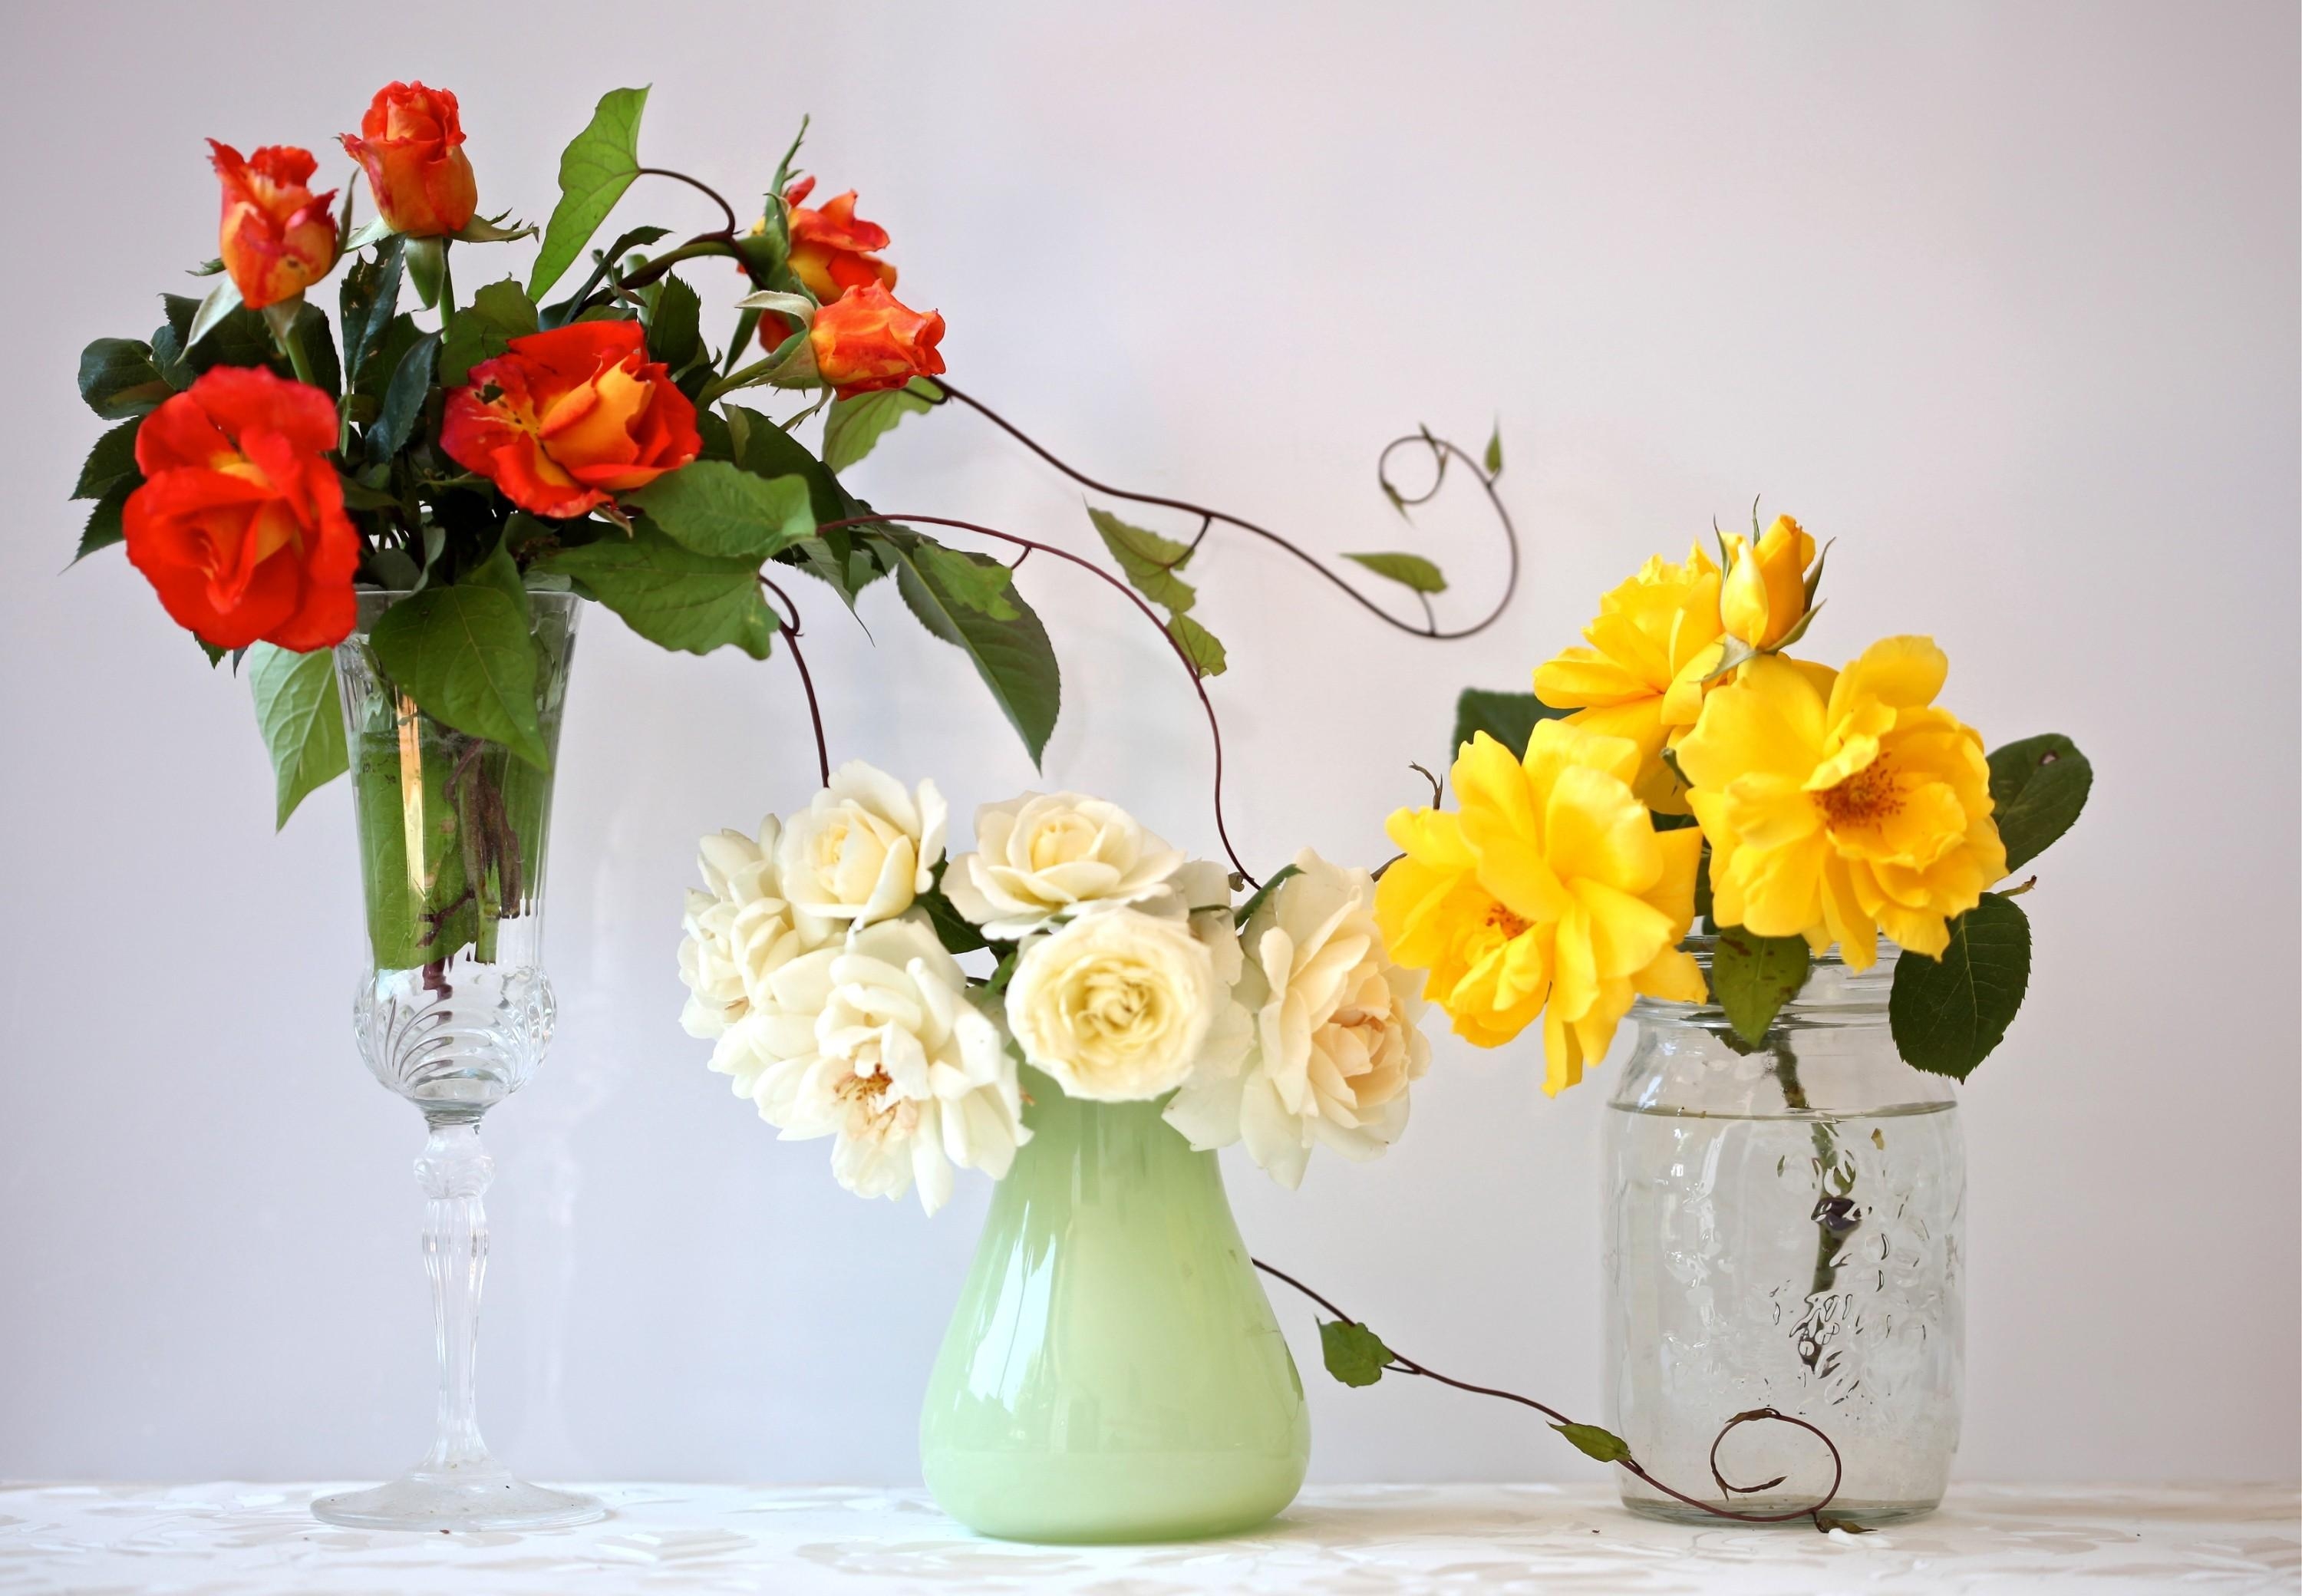 bouquets, flowers, roses, three, fougere, tall wine glass, different, vases